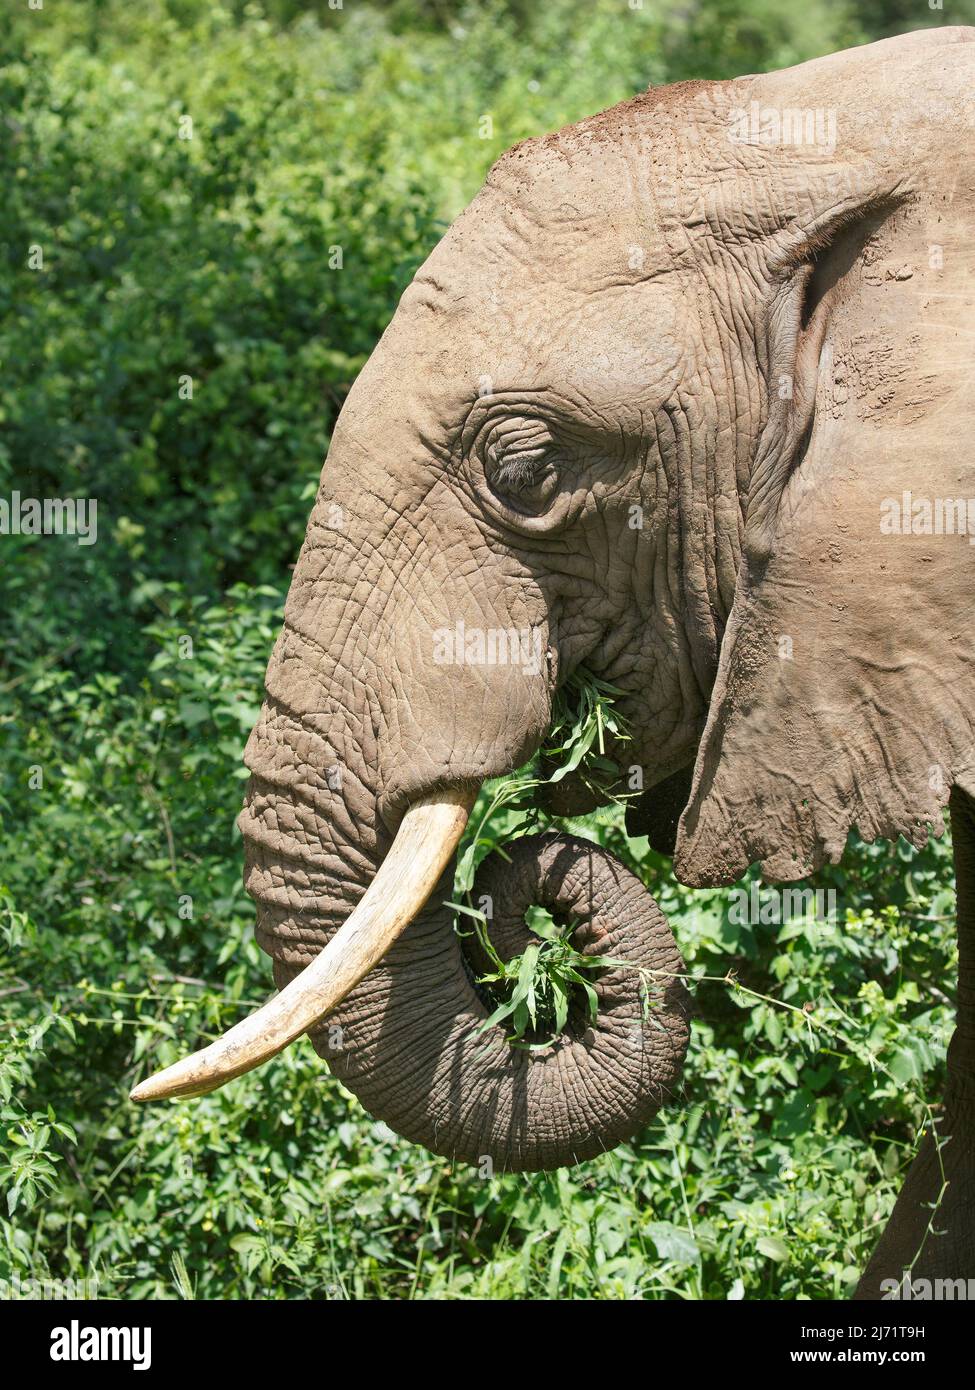 Close up view of an African Elephant (Loxodonta africana) pushing foliage into its mouth with its trunk Stock Photo